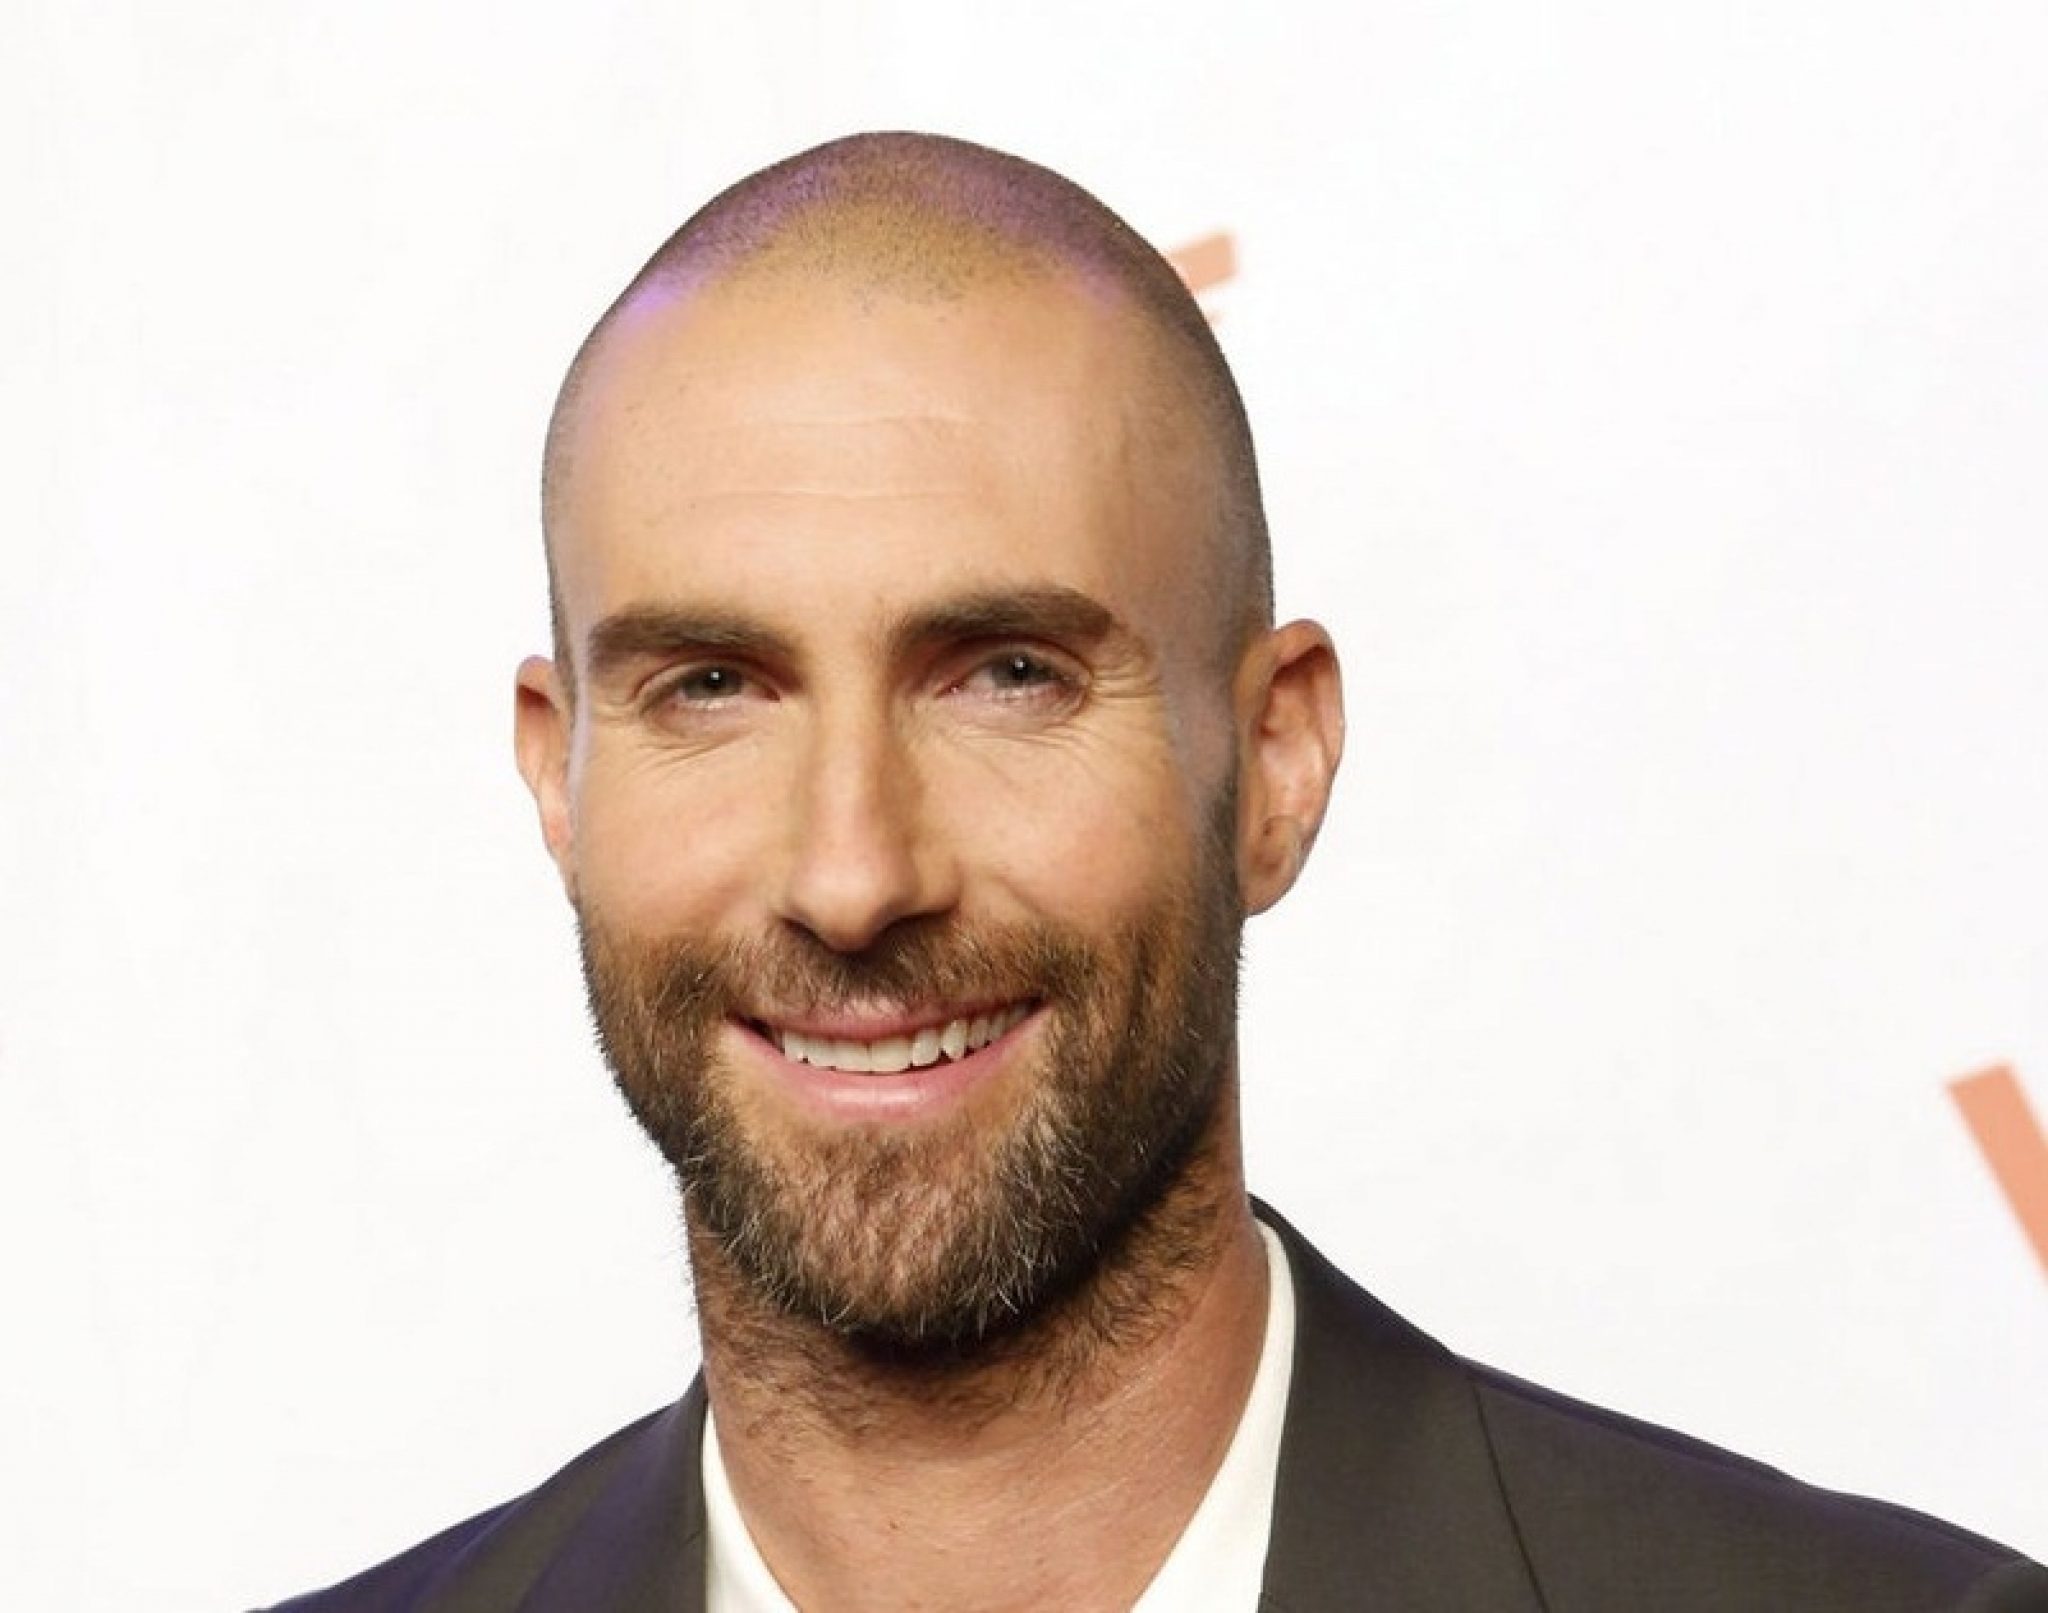 Adam Levine's Blue Hair Is the Latest in a Long Line of Bold Celebrity Hair Changes - wide 8